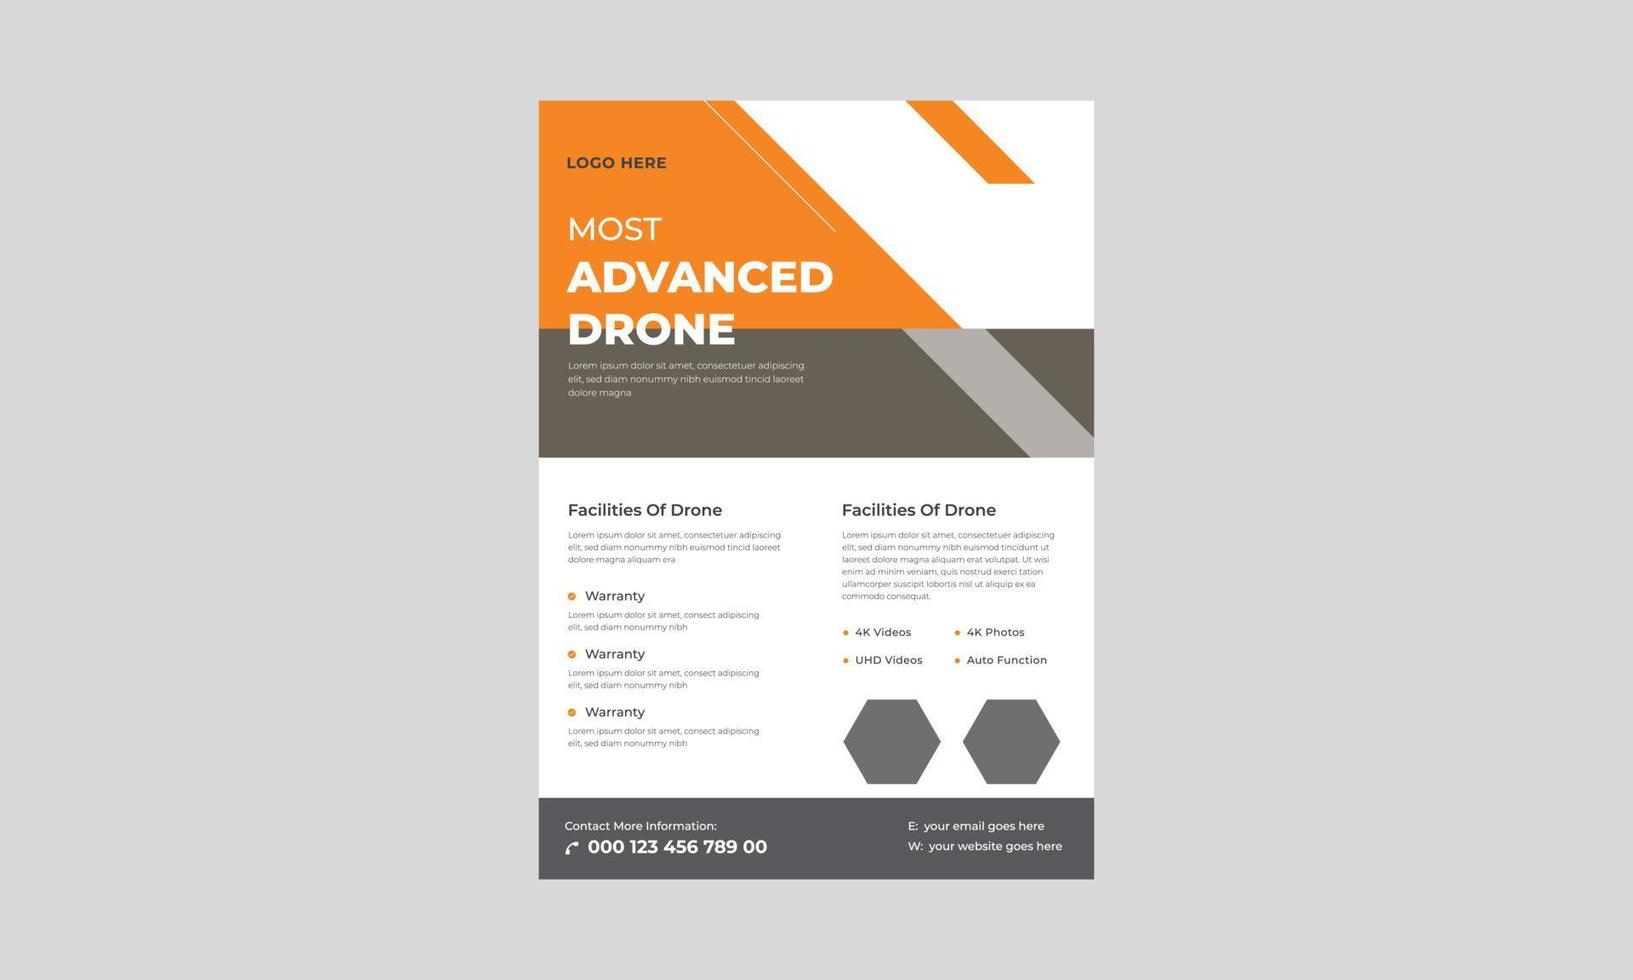  Drone Flyer Template, Most Advanced Drone Flyer, Drone Services, Drone